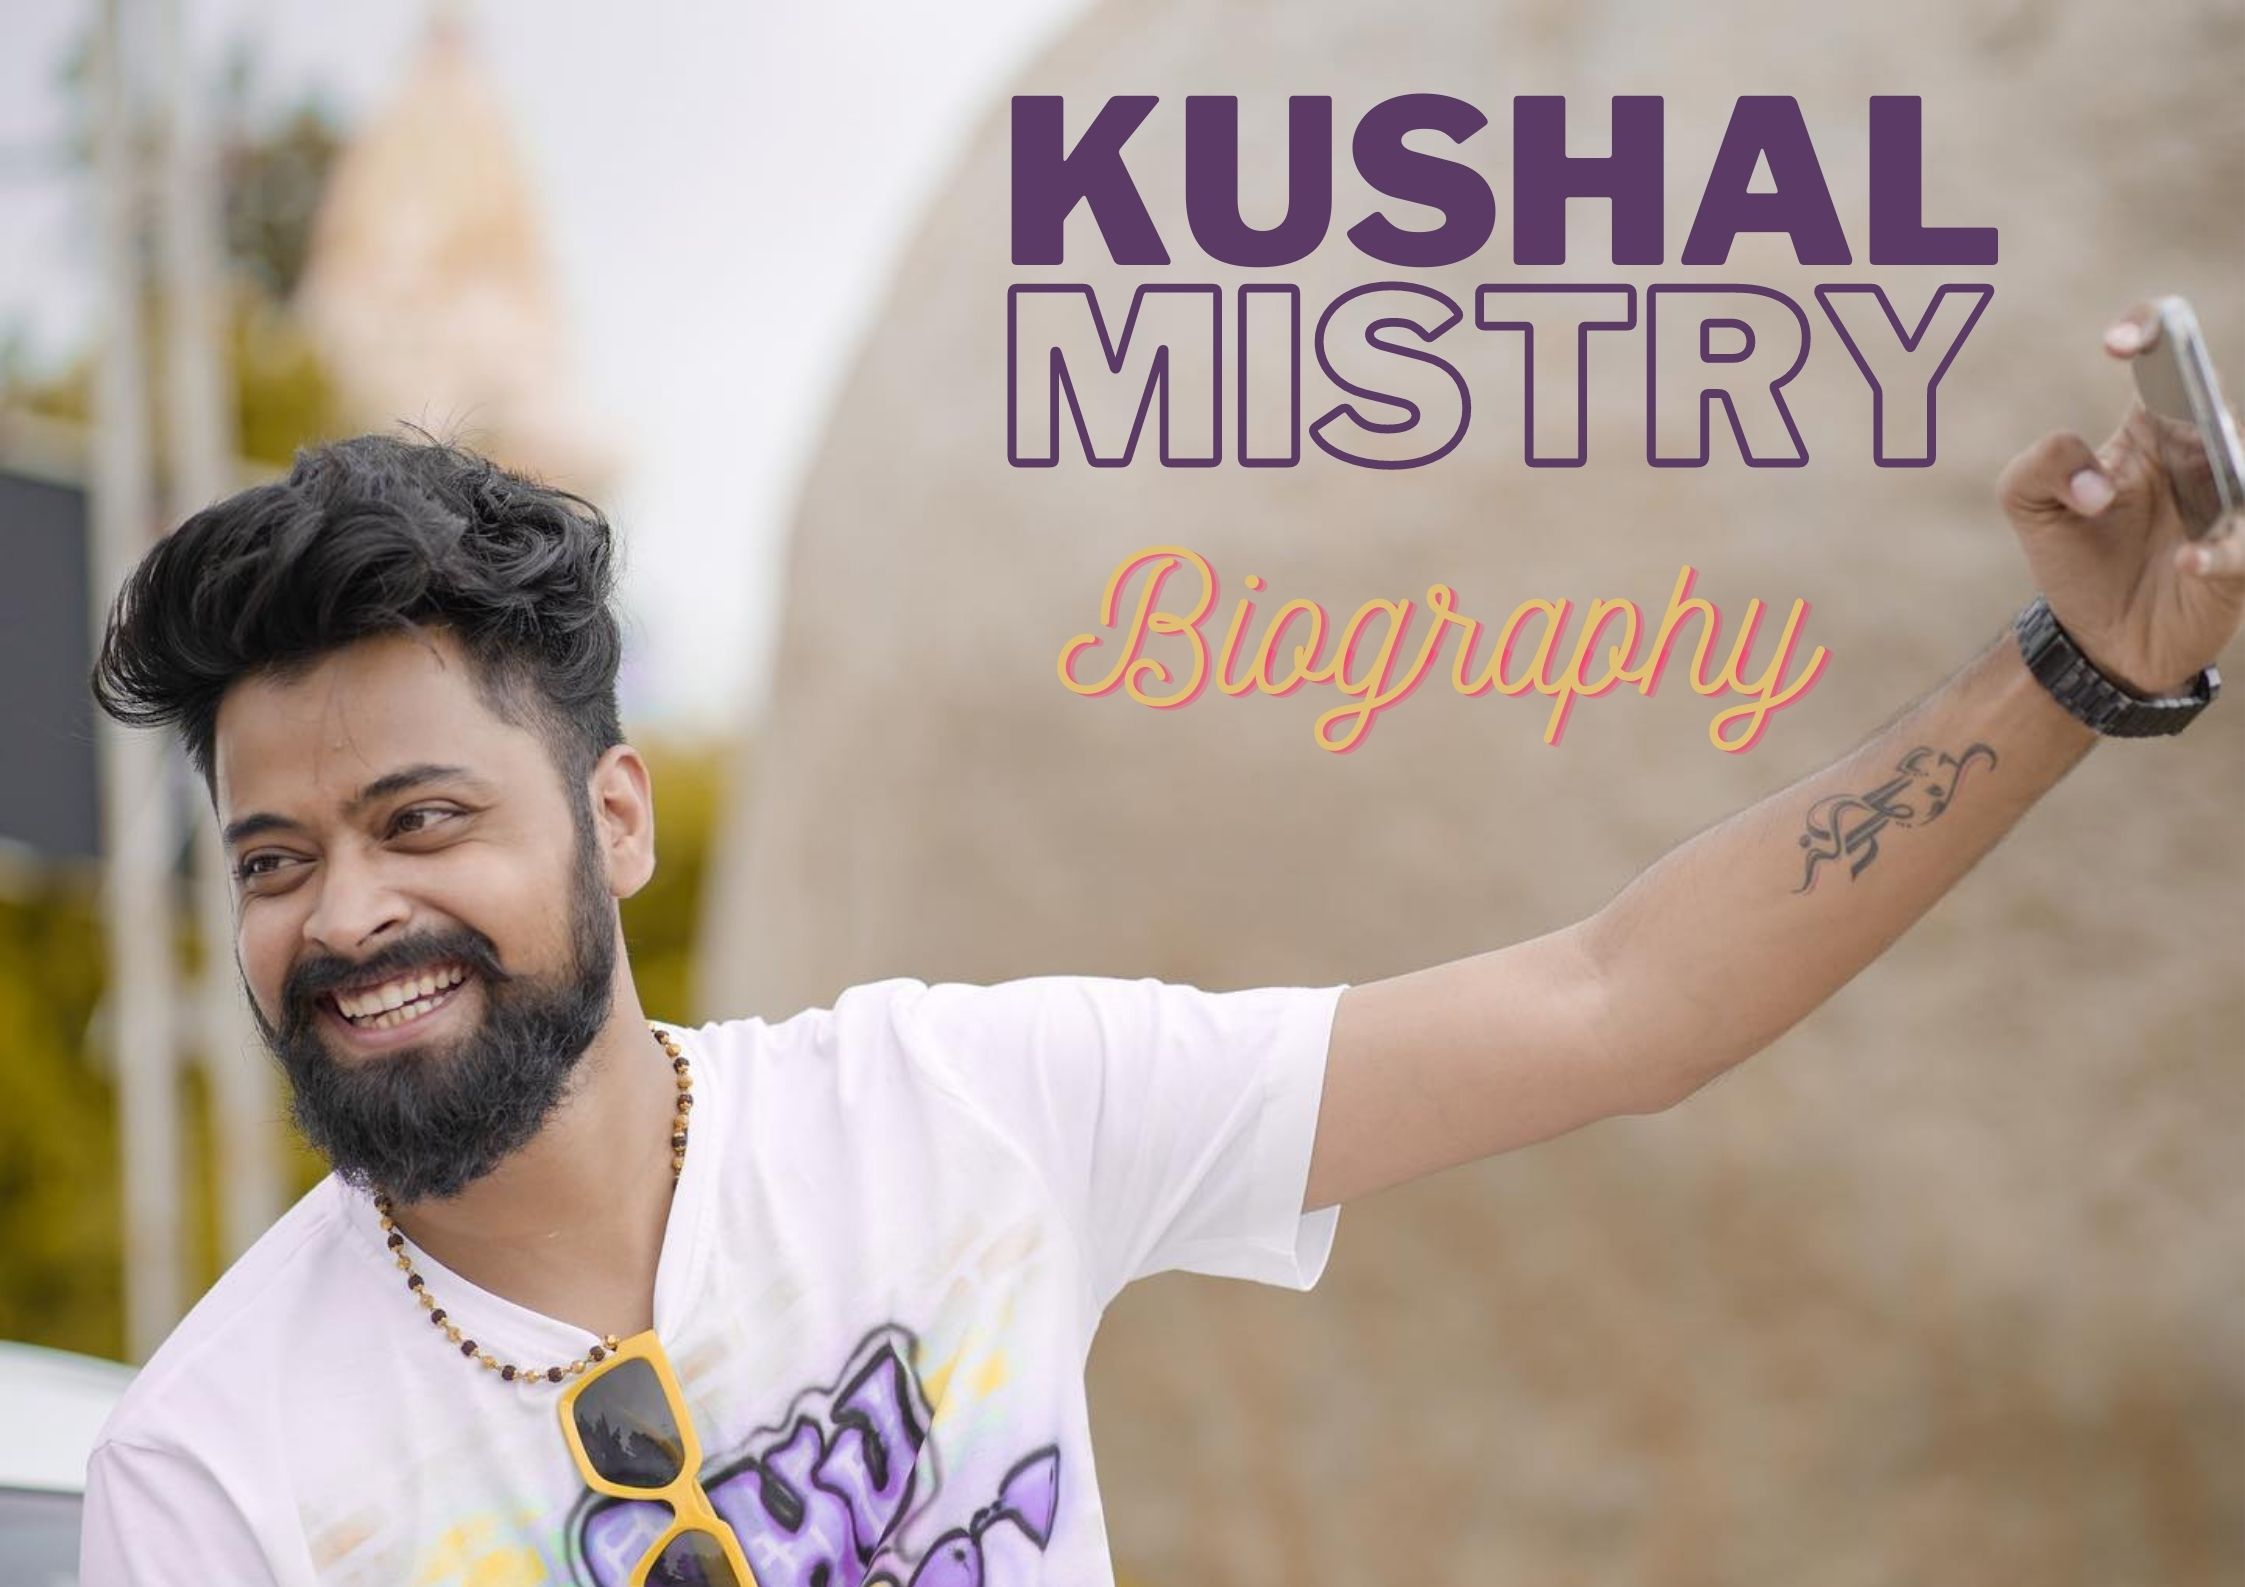 Kushal Mistry Biography, Education Age, Career, Income 2022